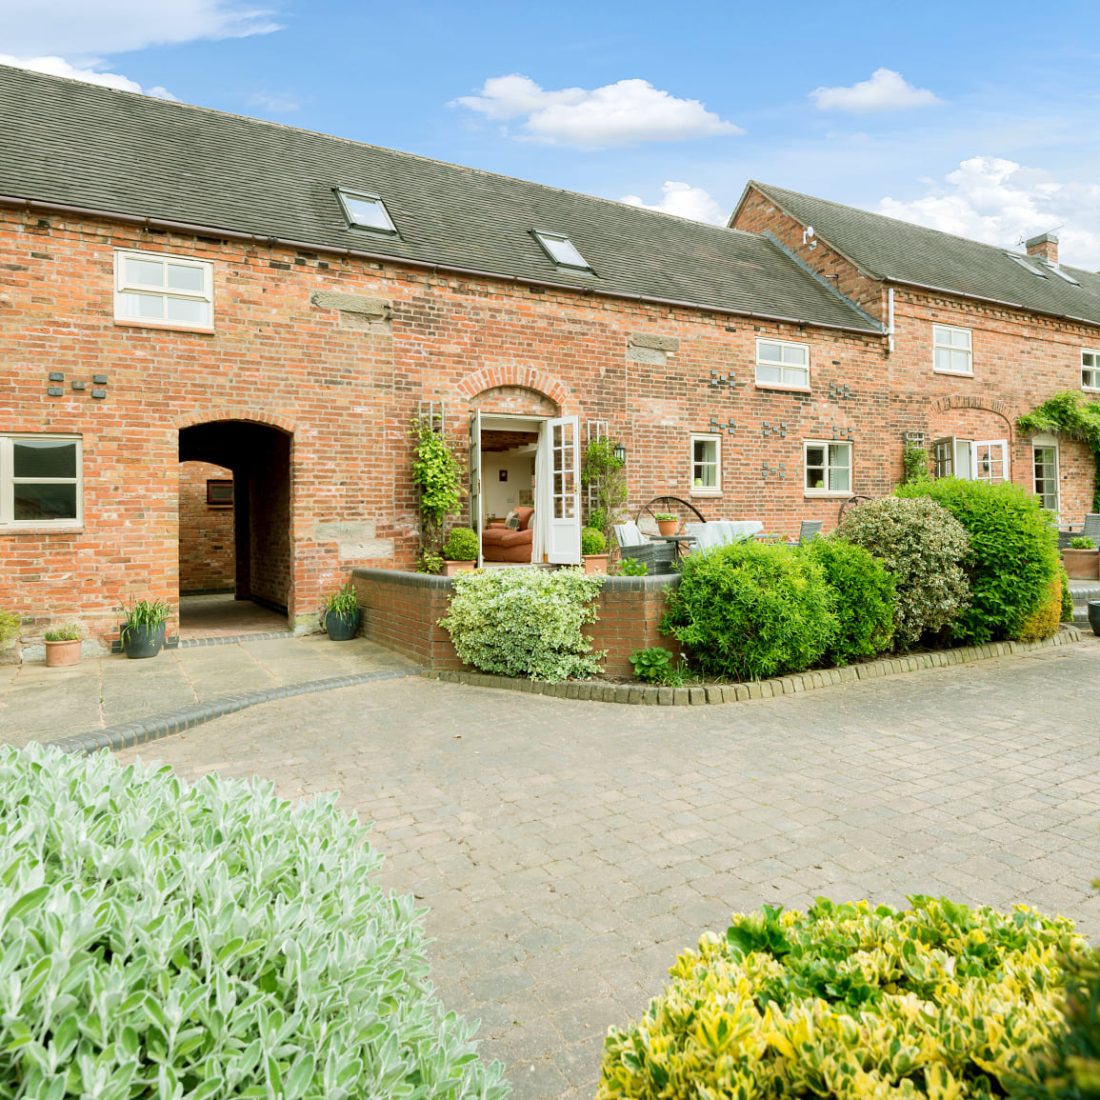 Upper Rectory Farm Cottages, Appleby Magna